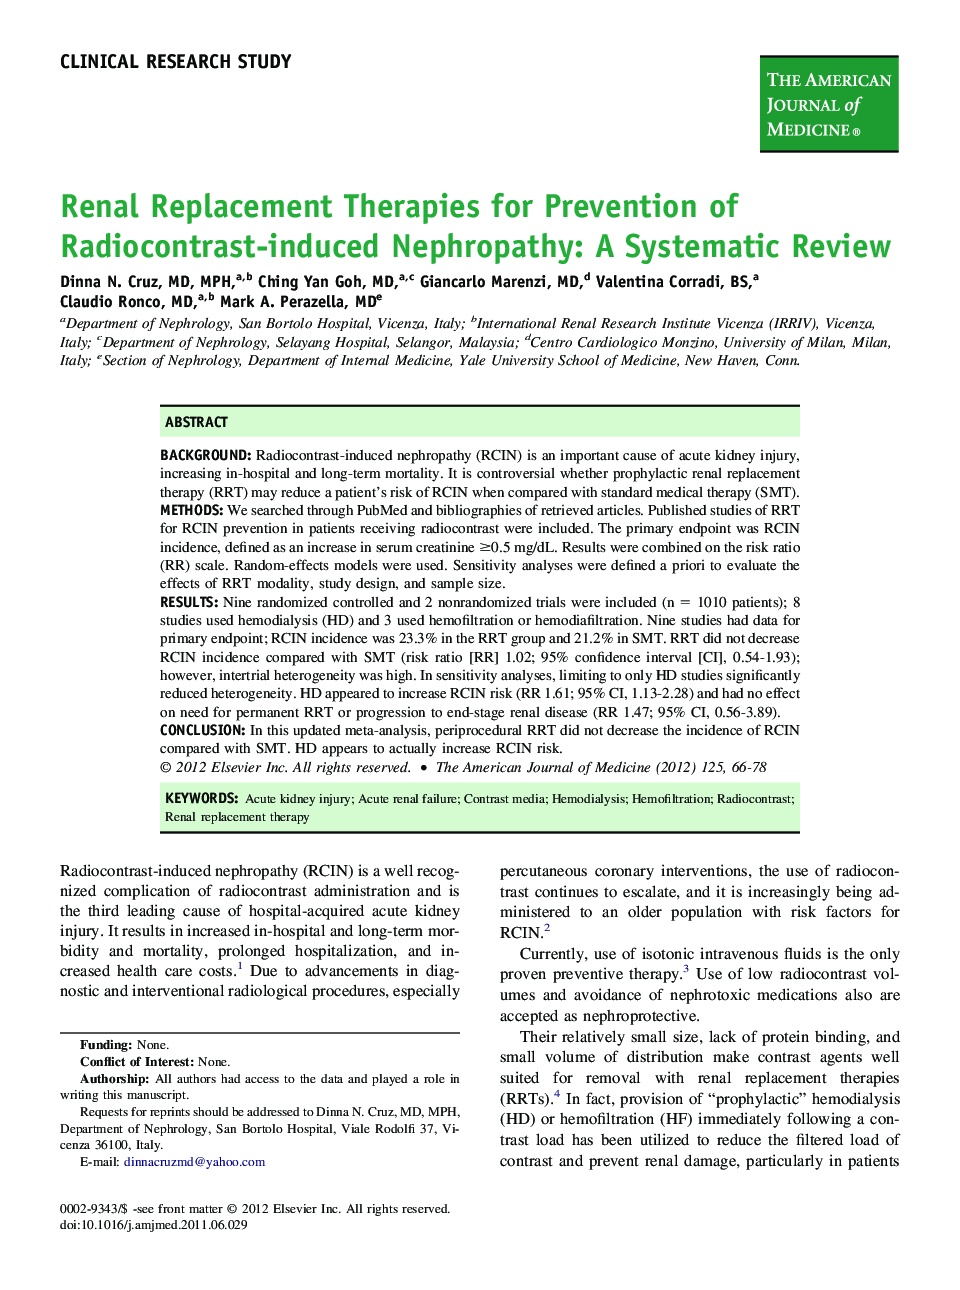 Renal Replacement Therapies for Prevention of Radiocontrast-induced Nephropathy: A Systematic Review